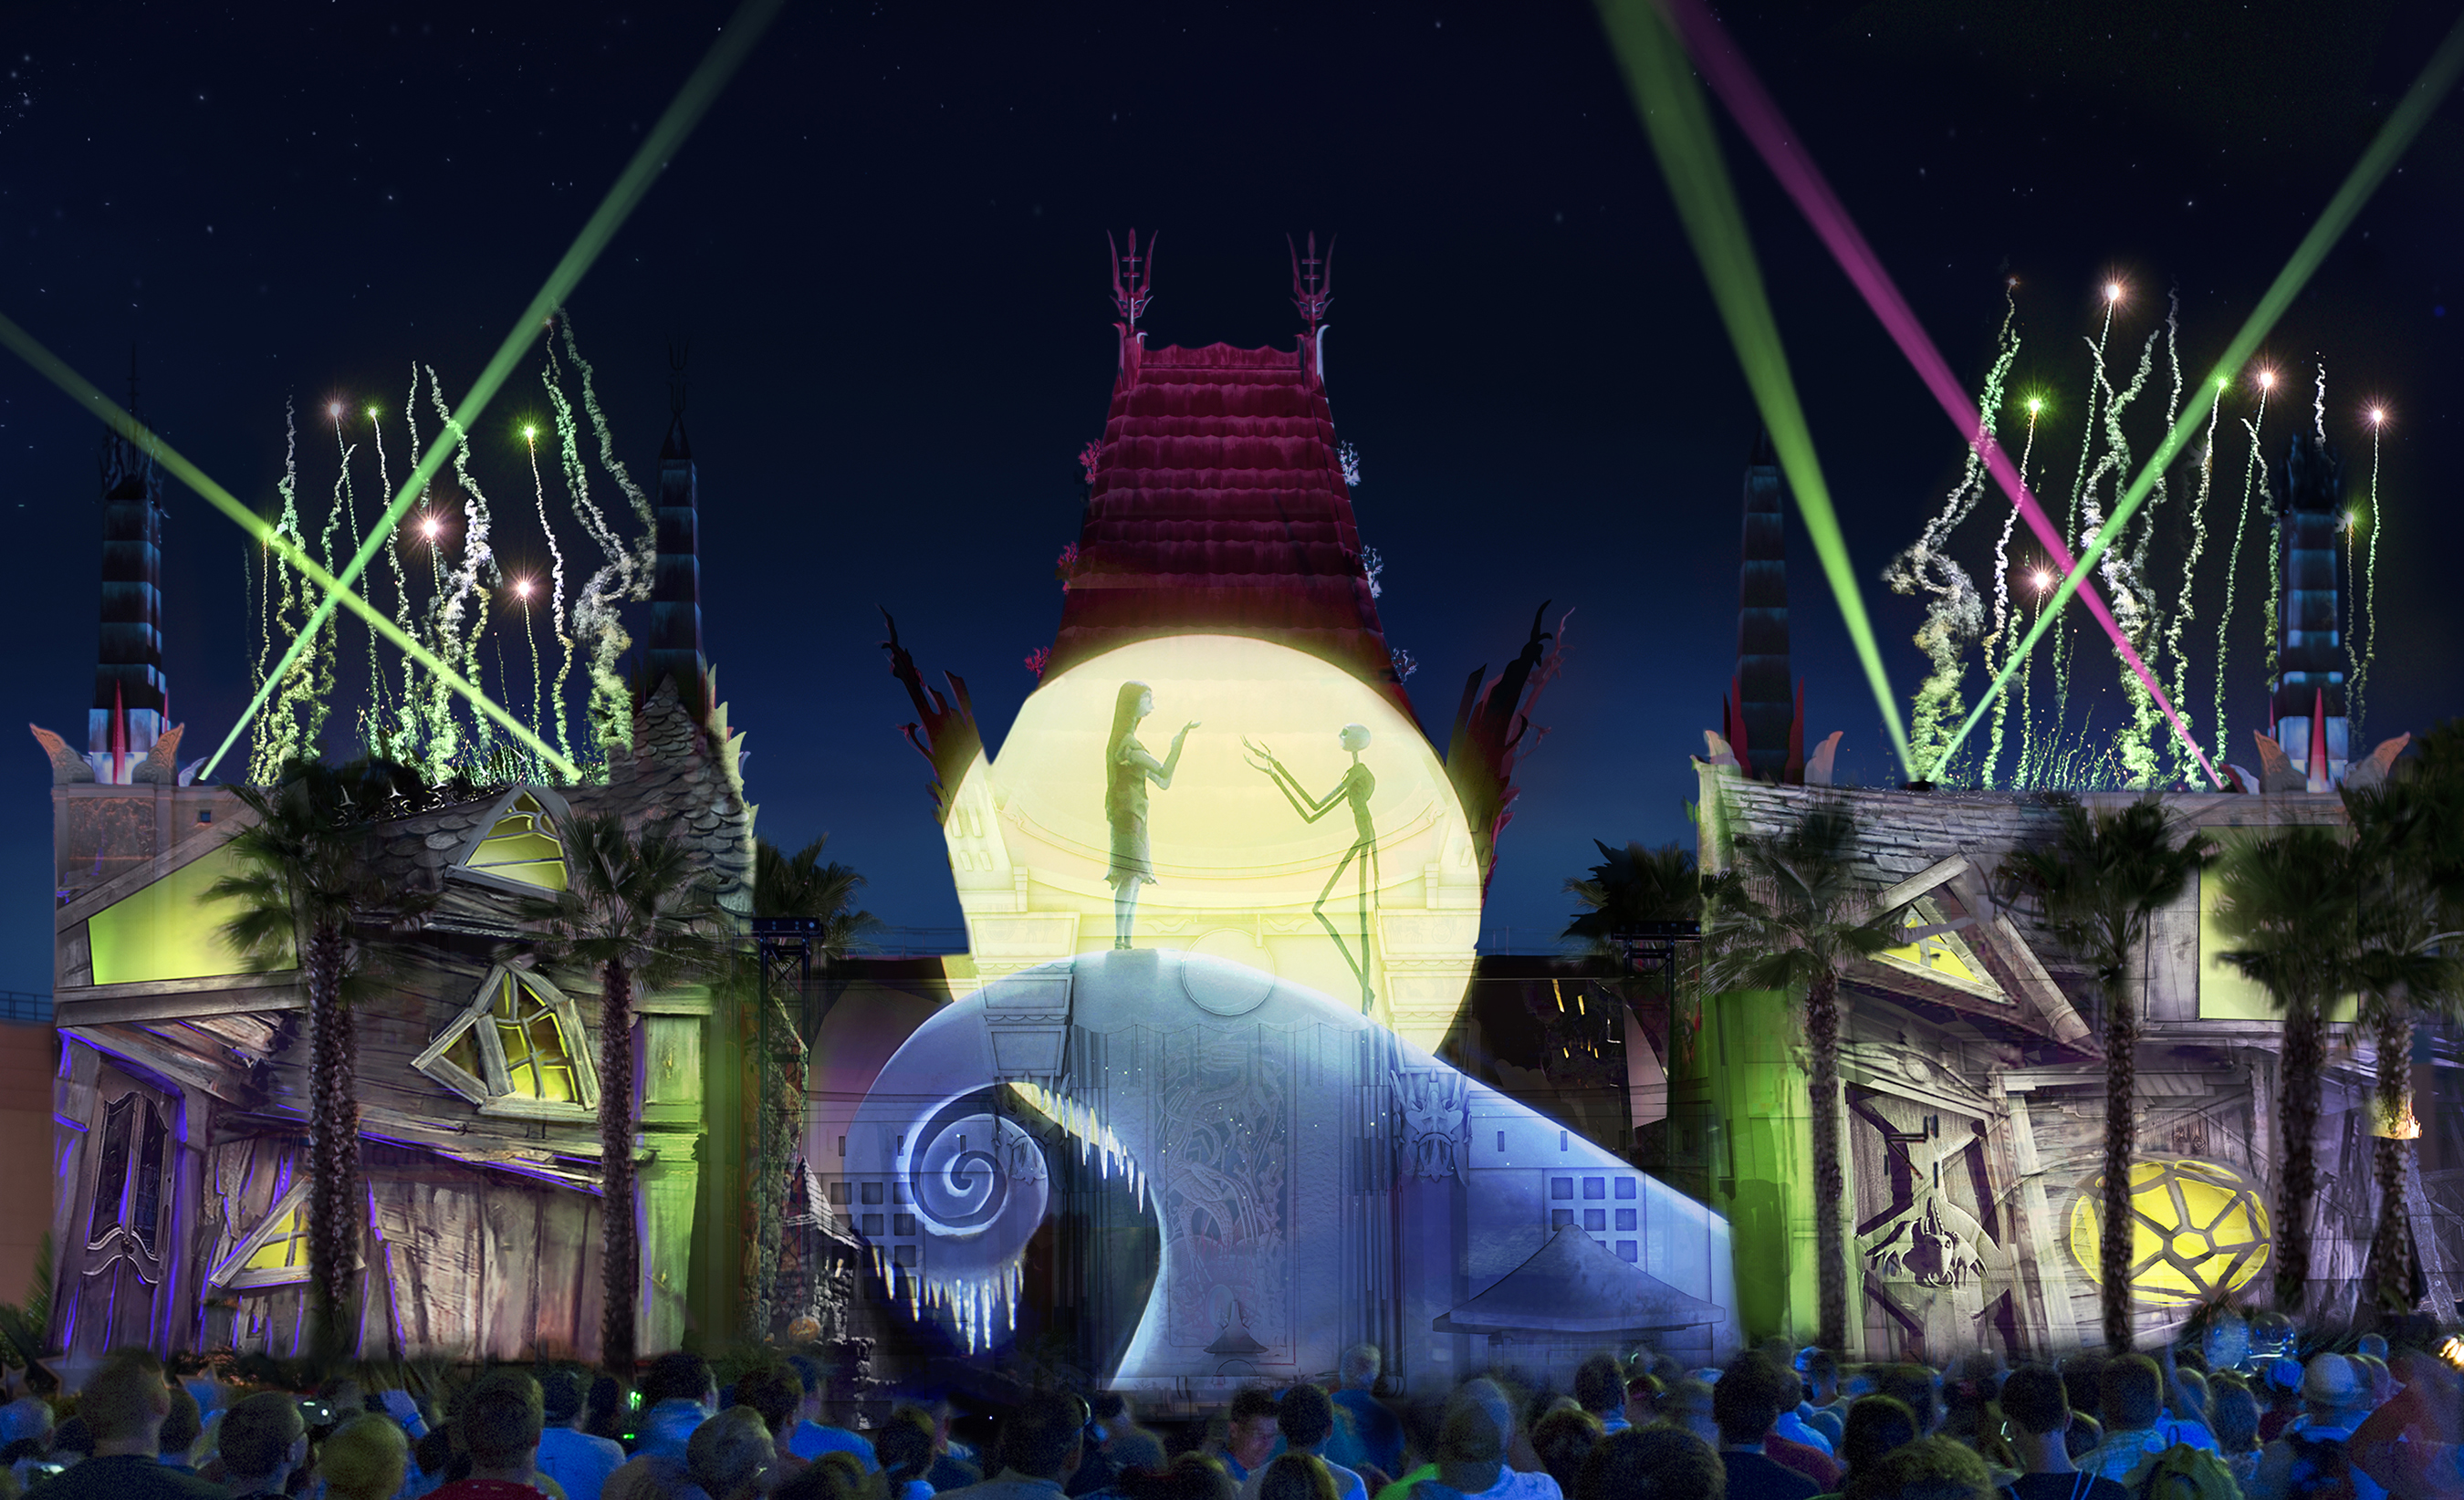 “Jingle Bell, Jingle BAM!” celebrates the season with state-of-the-art projections, special effects, fireworks and more